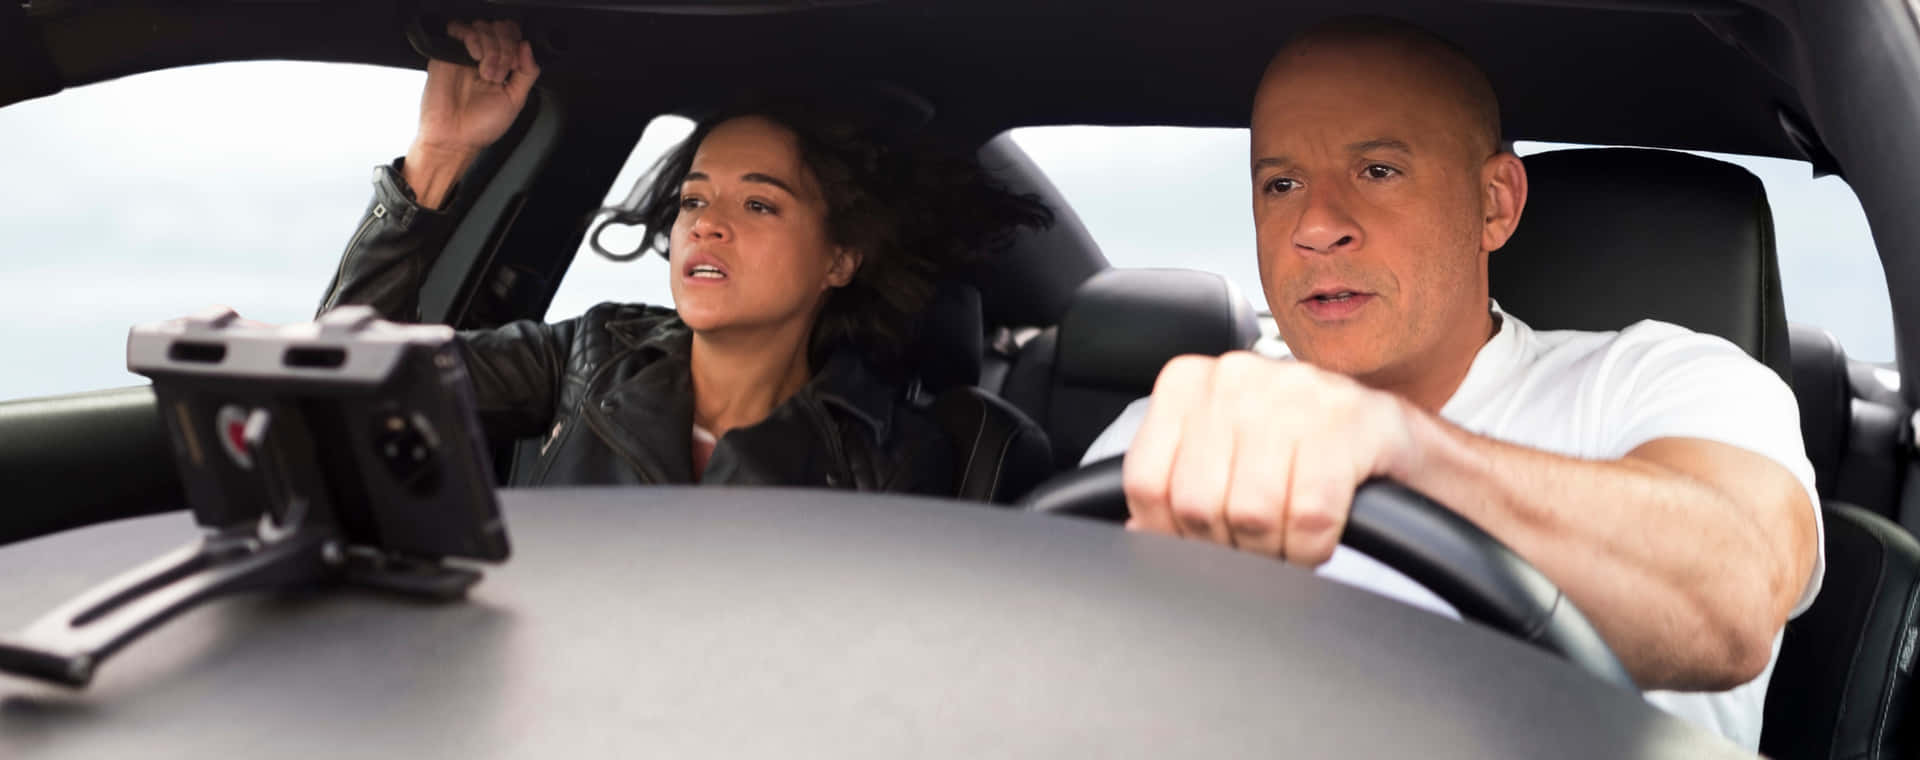 Take a Ride with the Fast and Furious 9 Team Wallpaper